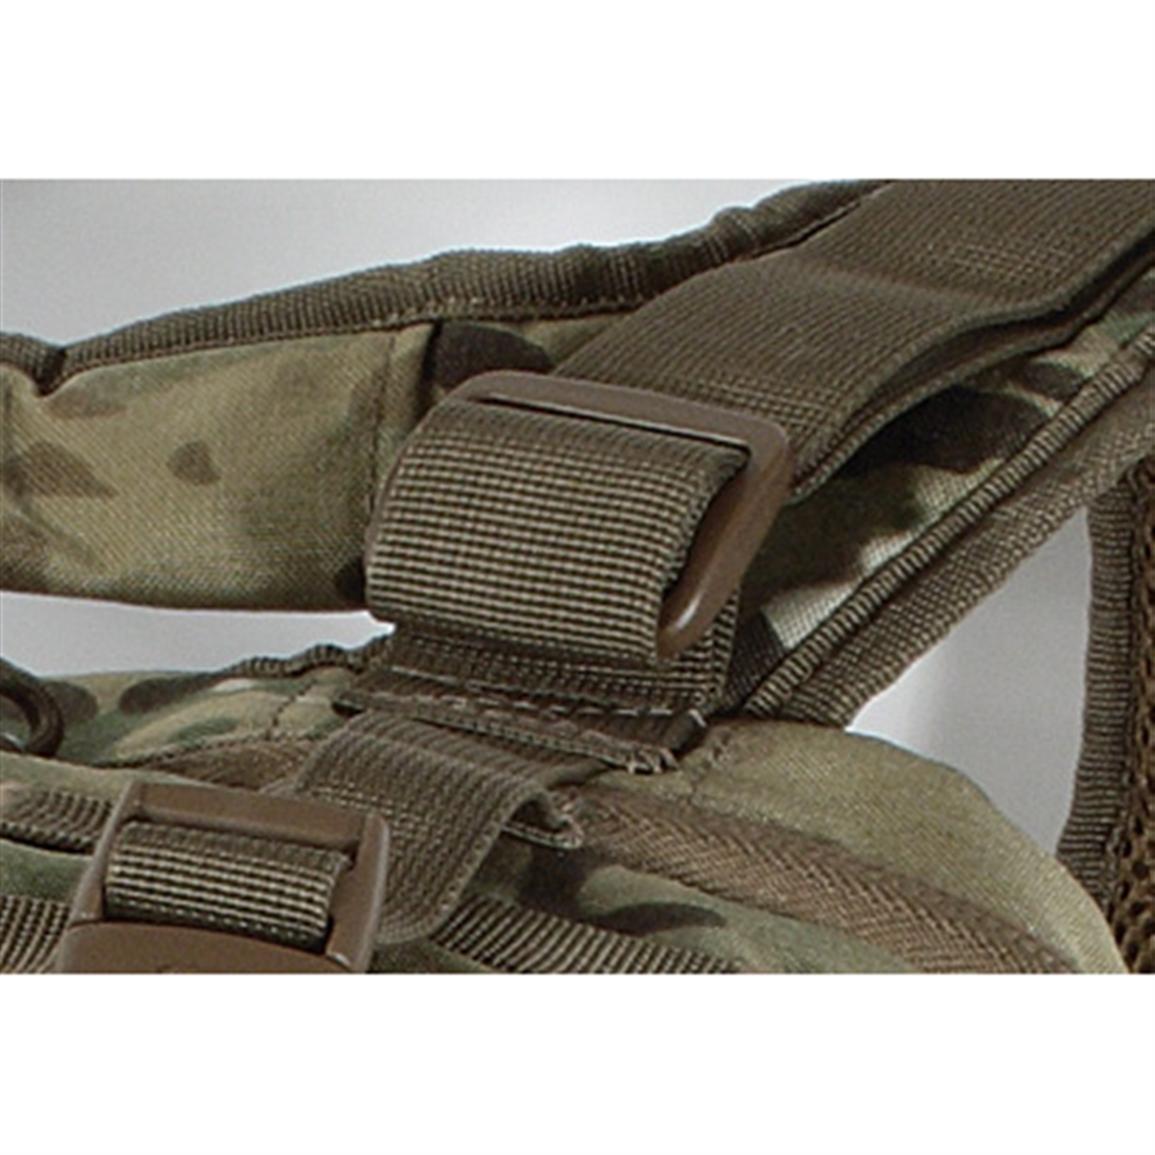 Voodoo Tactical™ MultiCam Improved MATRIX Pack - 177605, Military Style ...